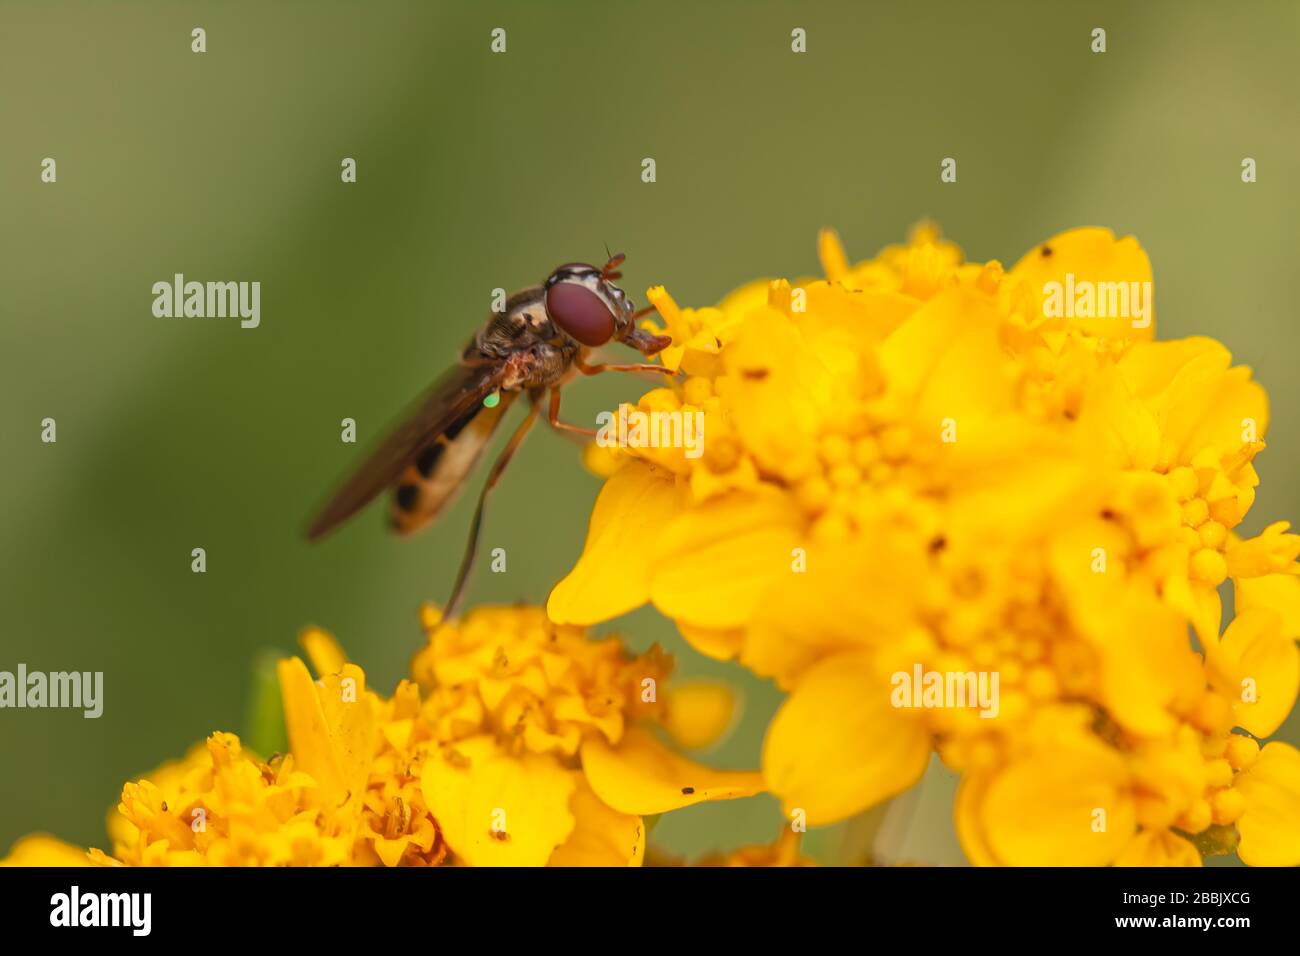 Close up at a hover fly, family Syrphidae, on cluster of seaside wooly sunflowers, Eriophyllum staechadifolium, California, USA. Stock Photo